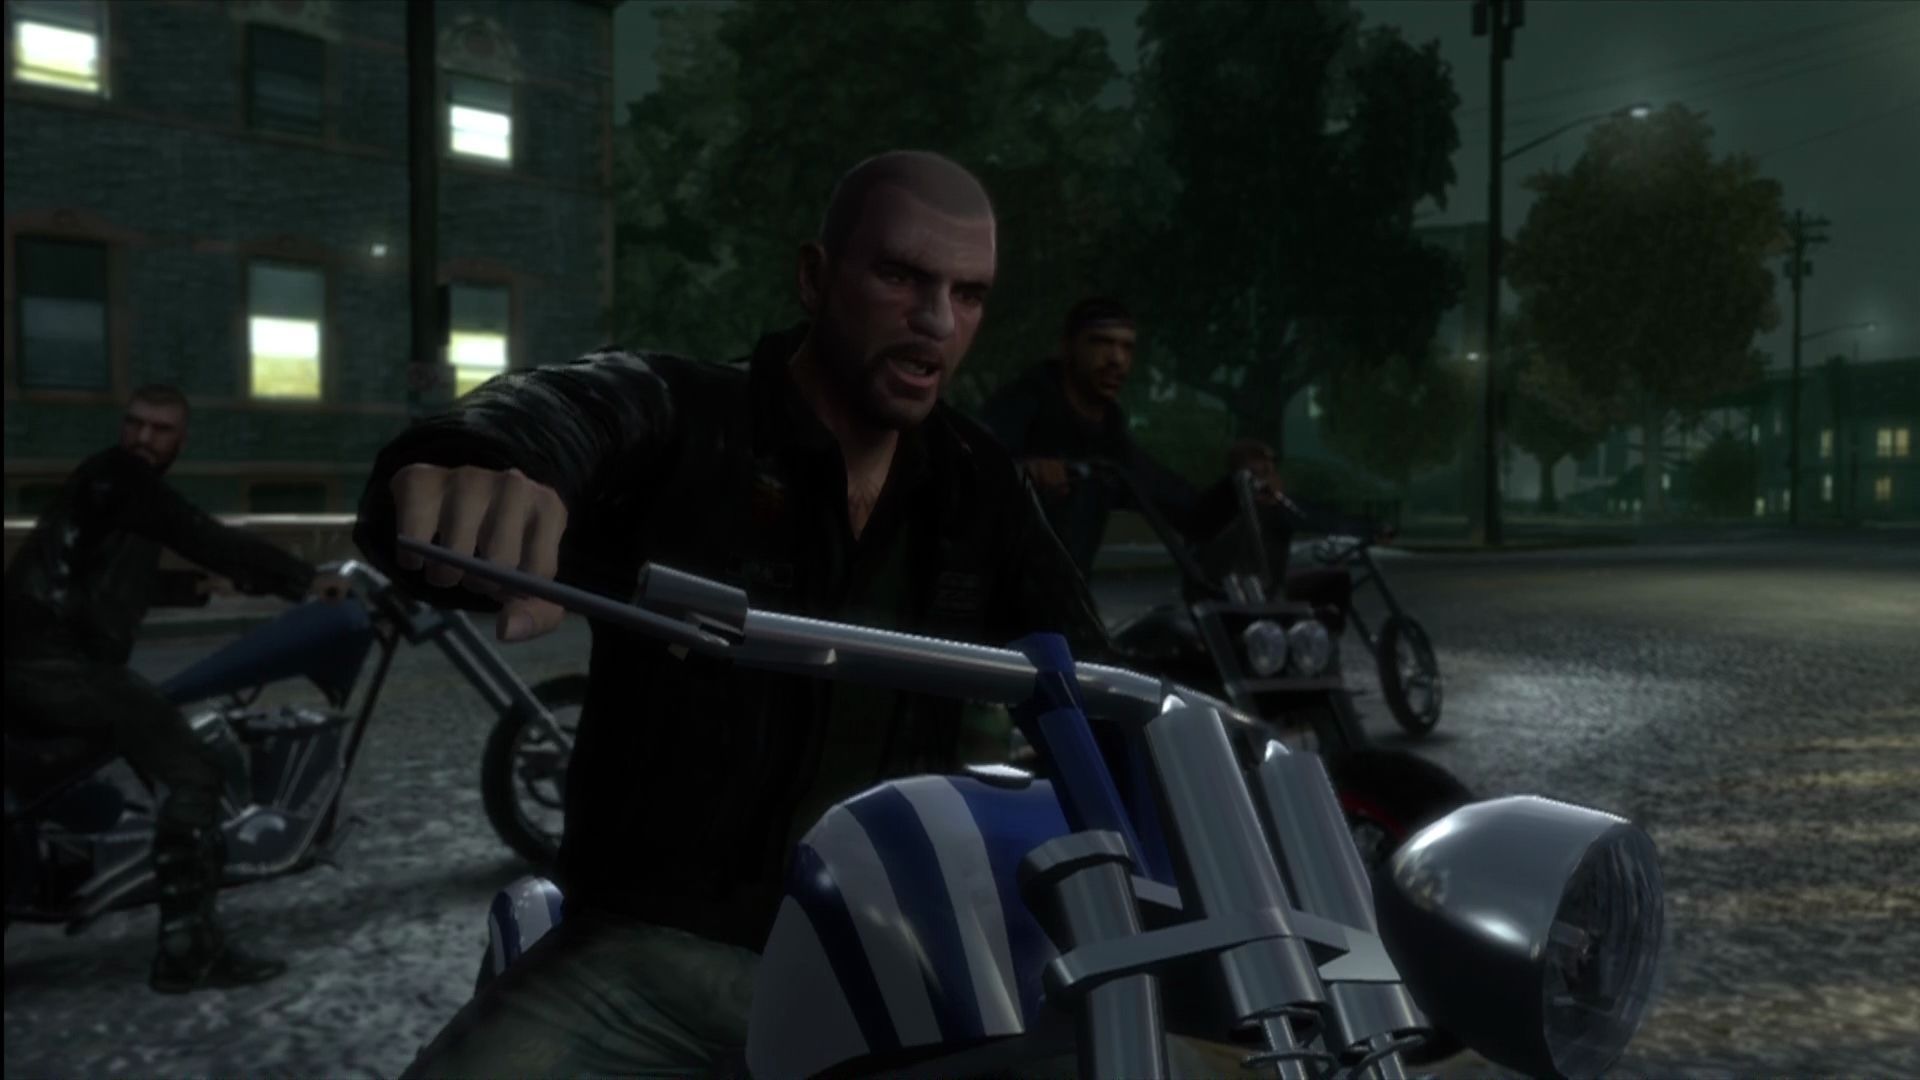 Grand Theft Auto IV: The Lost and Damned Screenshots for Xbox 360